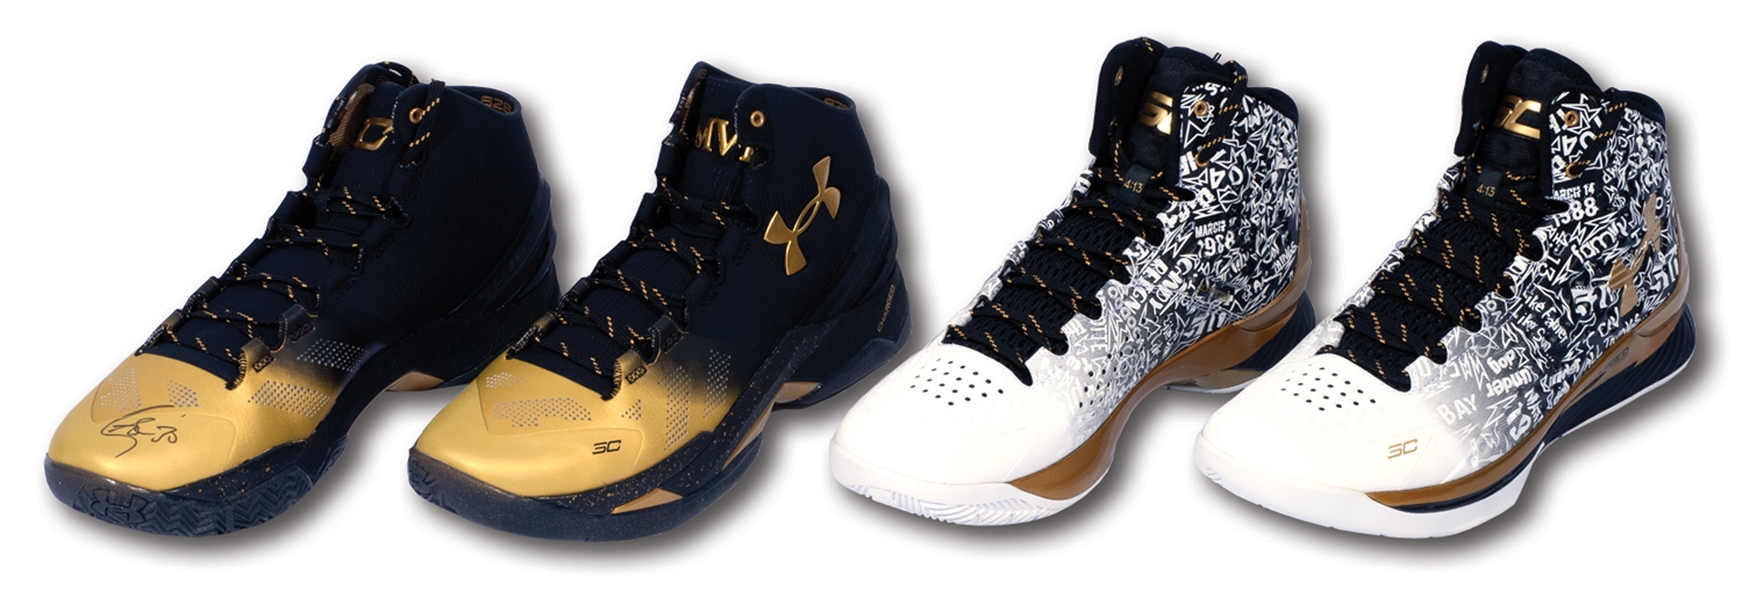 STEPHEN CURRY AUTOGRAPHED SET OF BACK-TO-BACK MVP (2014-25 & 2015-16) UNDER ARMOR SIGNATURE MODEL SHOES - EACH PAIR UNWORN & SIGNED